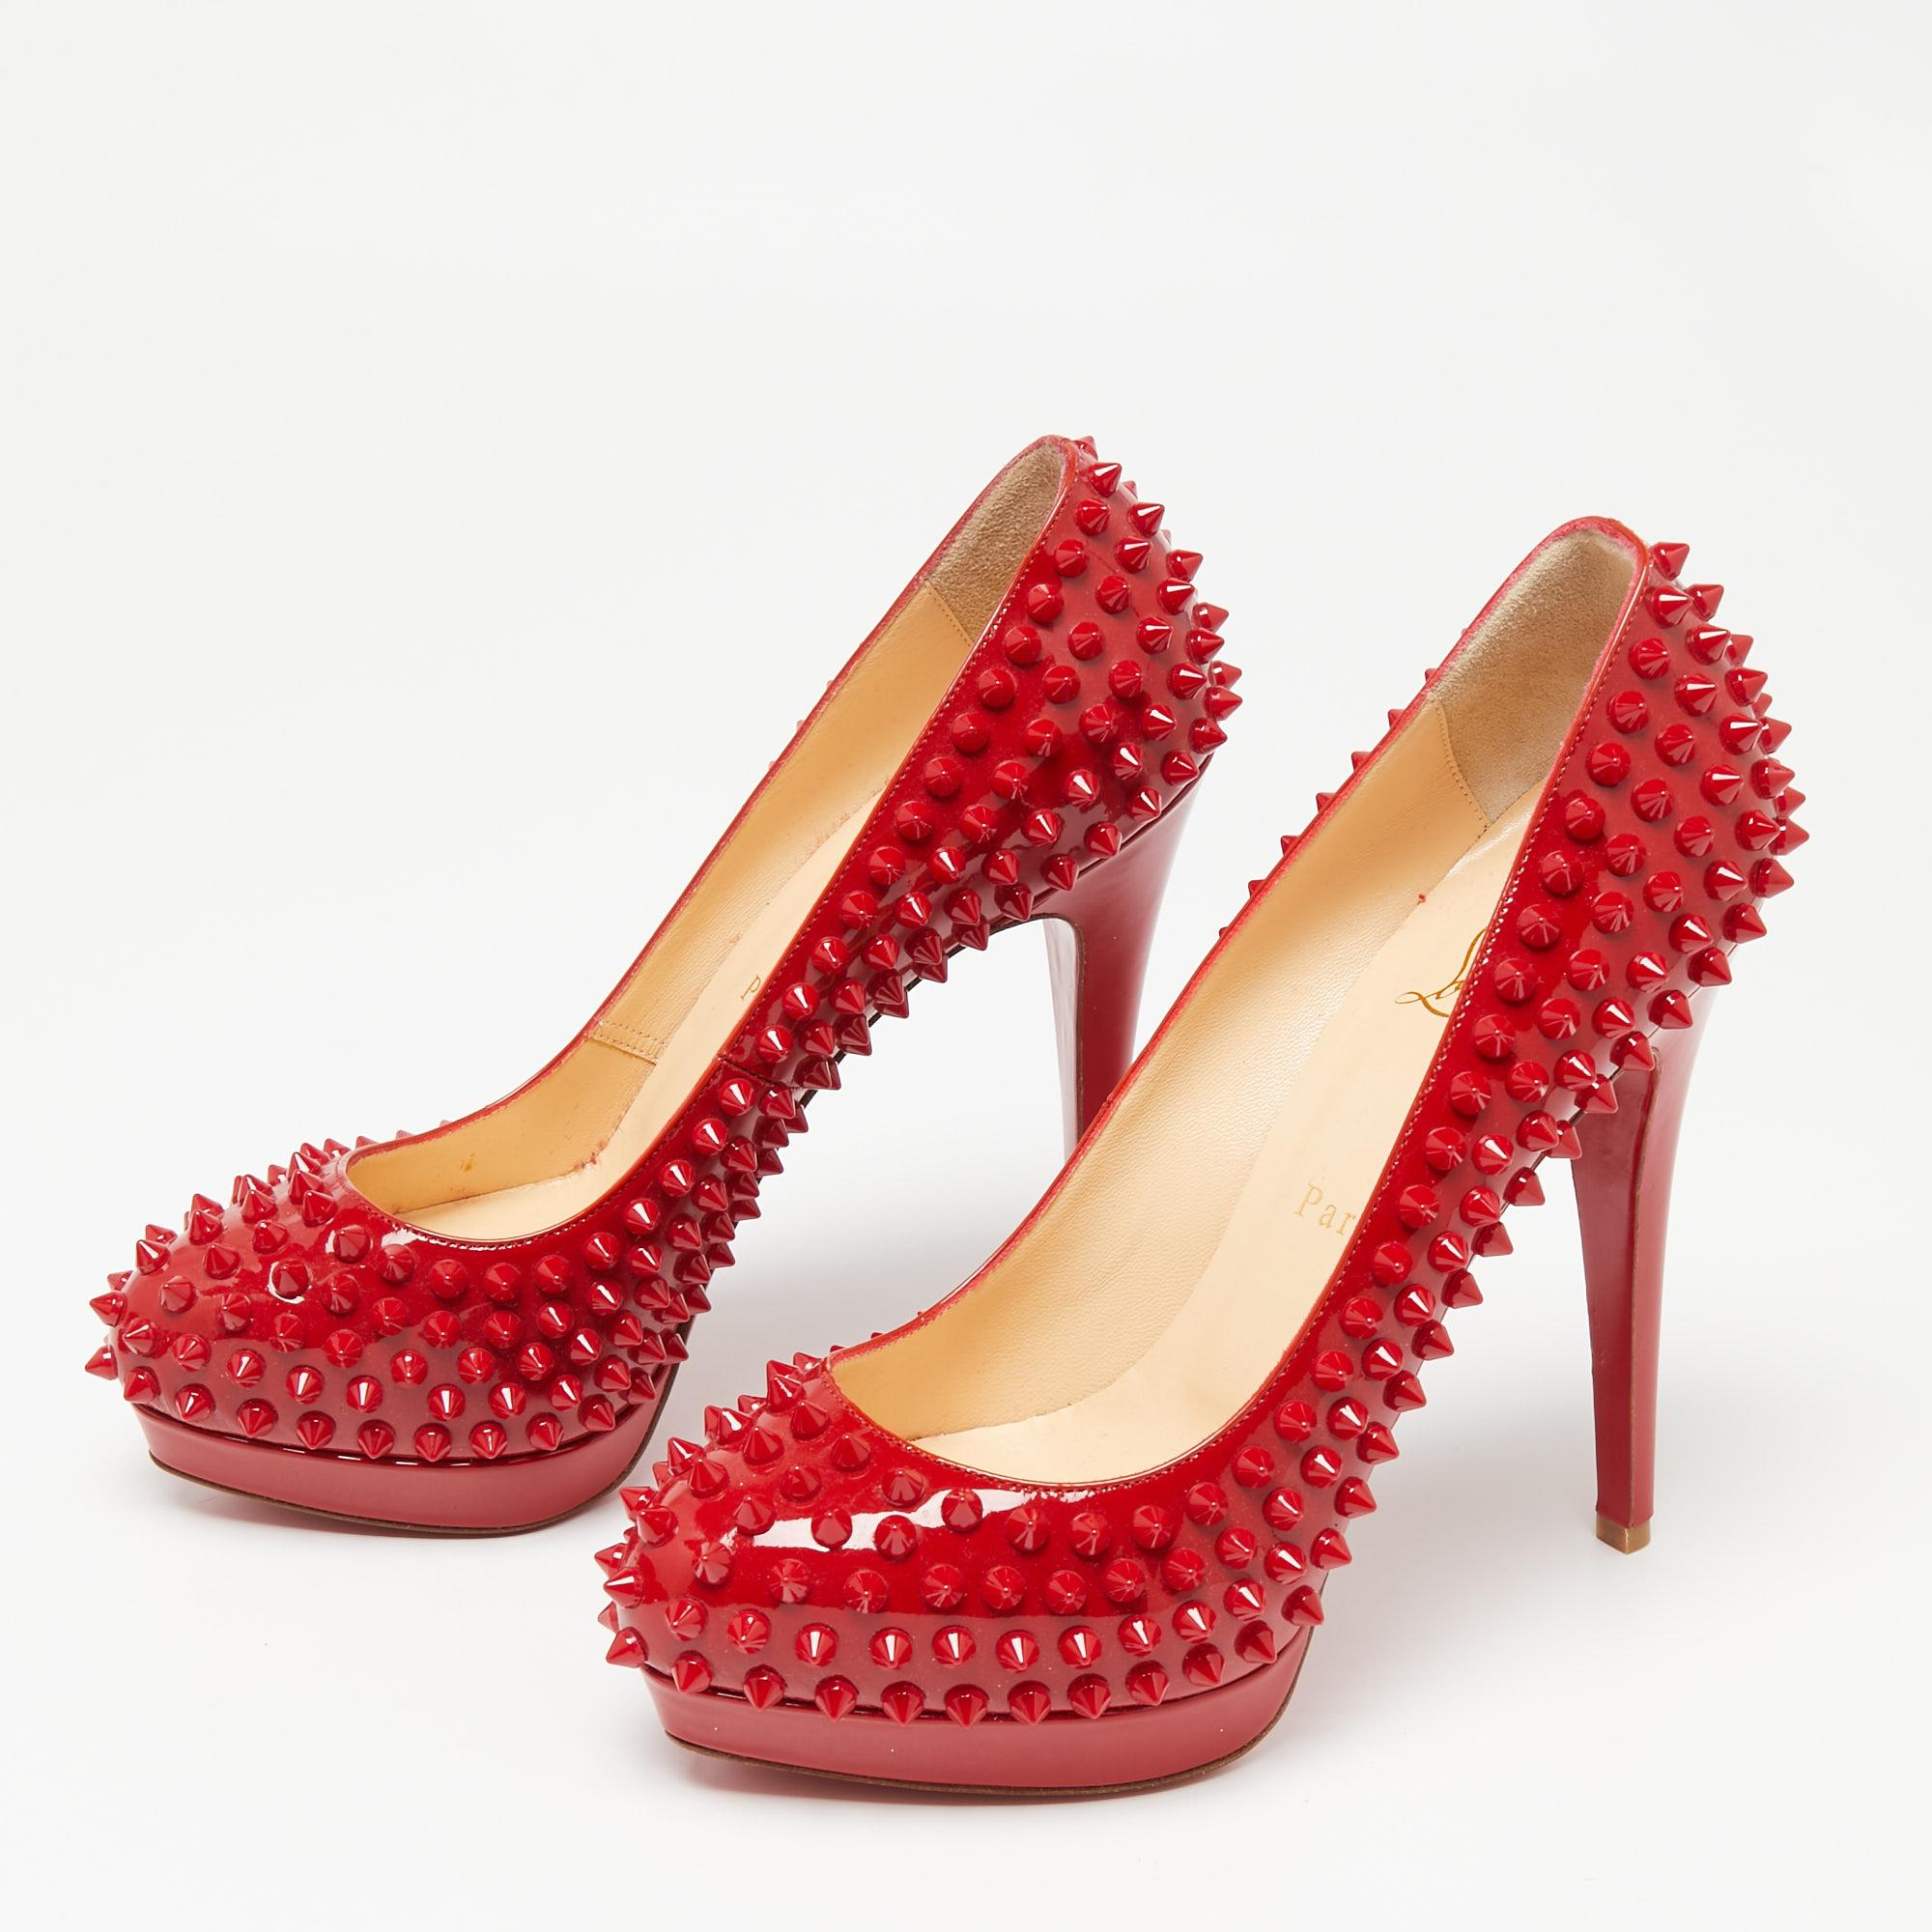 Make a dazzling statement in these Louboutins! Crafted from patent leather, these red CL pumps have covered toes, spike embellishments, and 13 cm heels. Complete with the signature red soles, this pair embodies the fine art of shoemaking.

Includes: